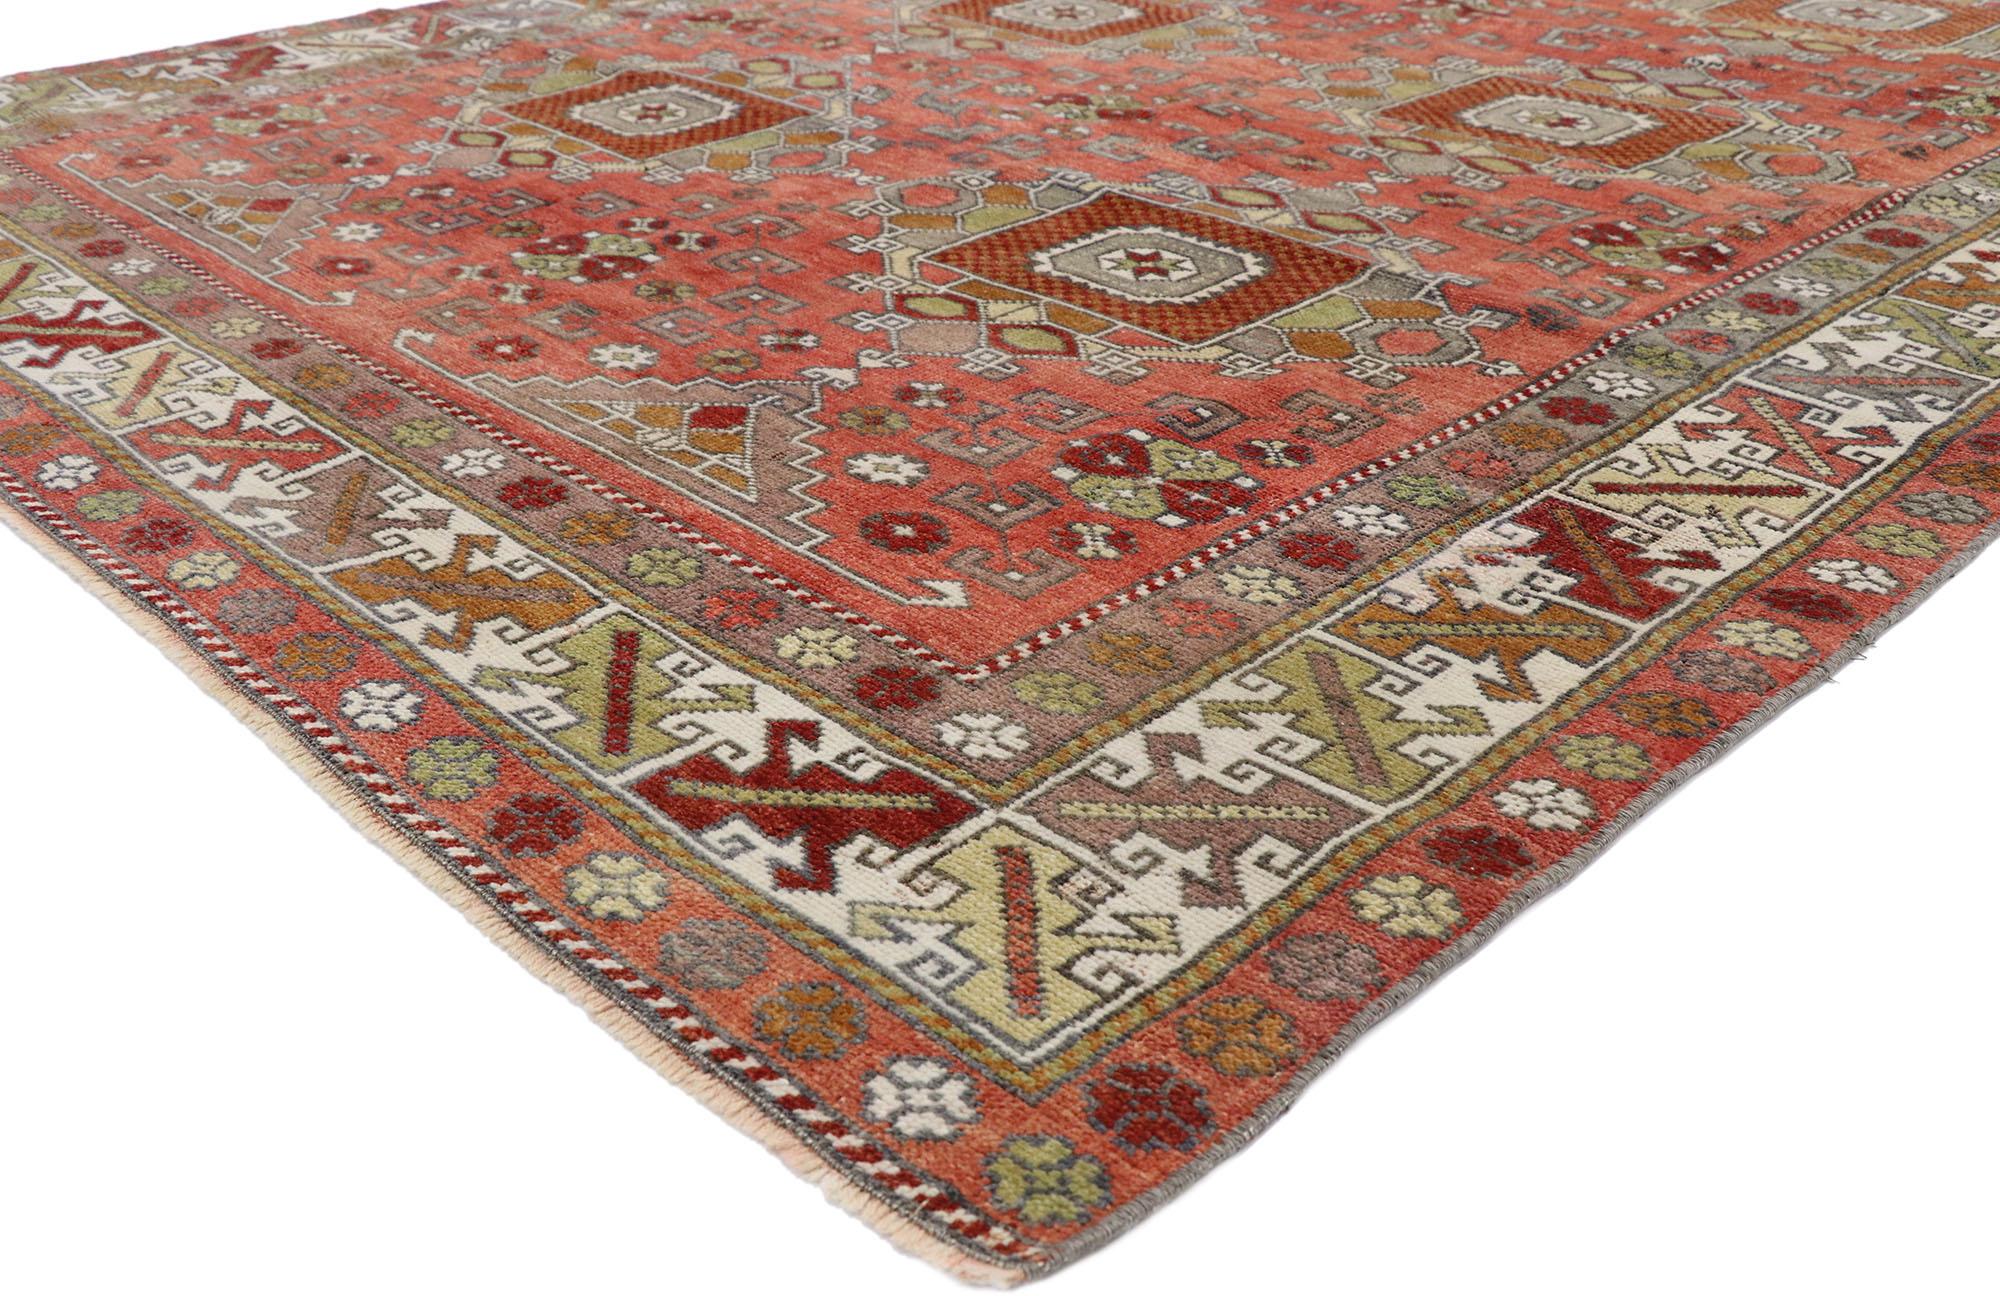 52751 vintage Turkish Oushak Gallery rug. Displaying balanced symmetry and bold geometric shapes, this hand knotted wool vintage Turkish Oushak gallery rug embodies tribal style with rectilinear design elements from the past. Two vertical columns of